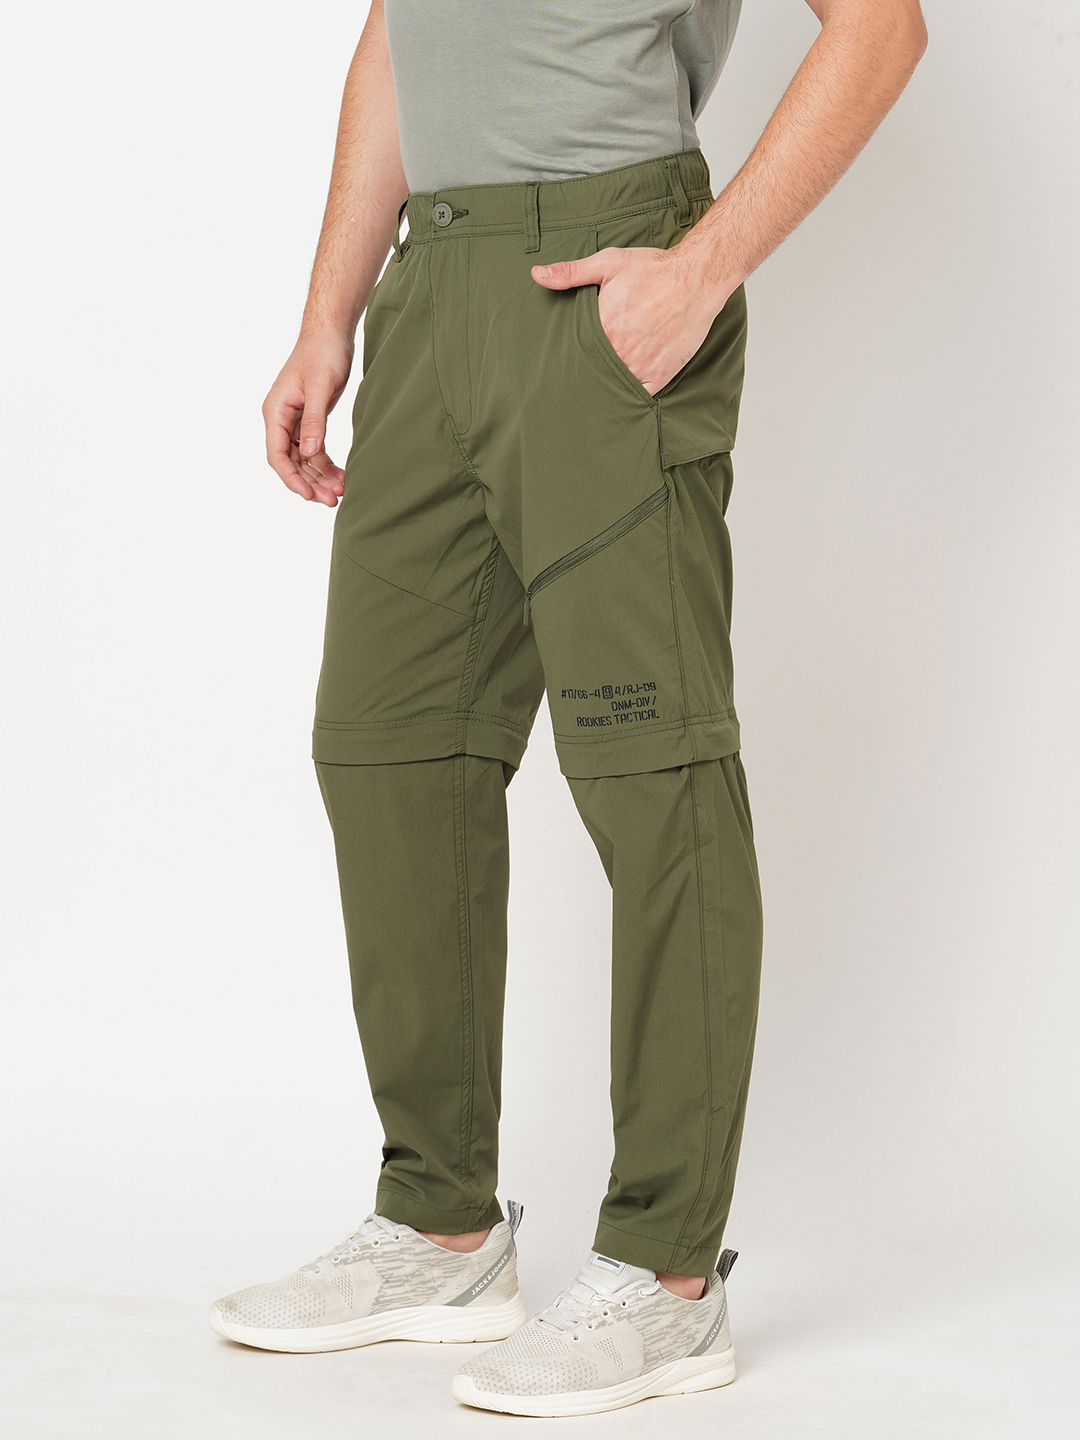 IVY GREEN UTILITY PANT (SLIM TAPERED FIT)